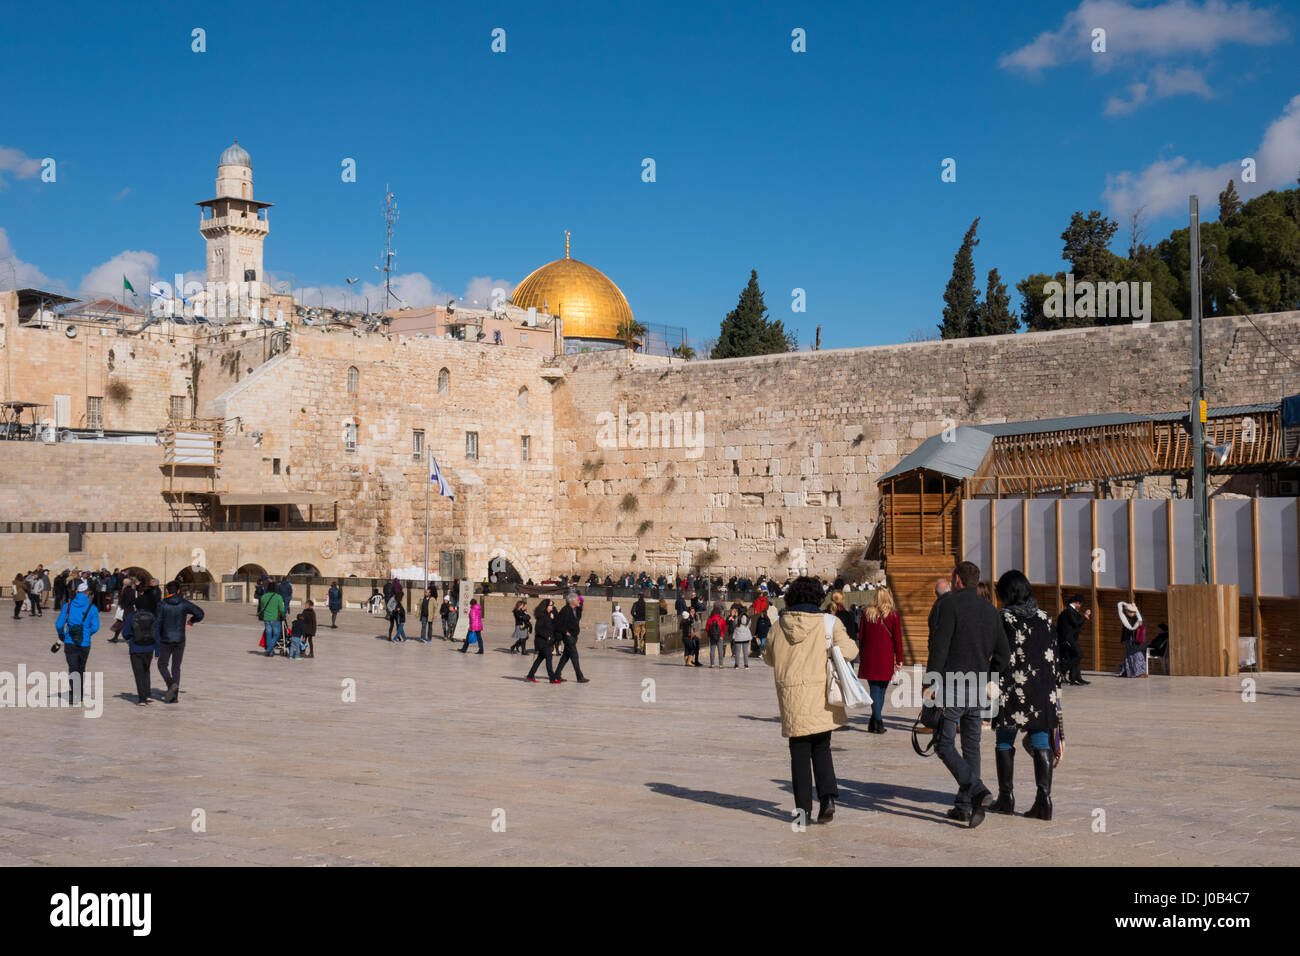 People pray at the western wall. The western wall is an exposed section of ancient wall situated on the western flank of the Temple Mount. Stock Photo